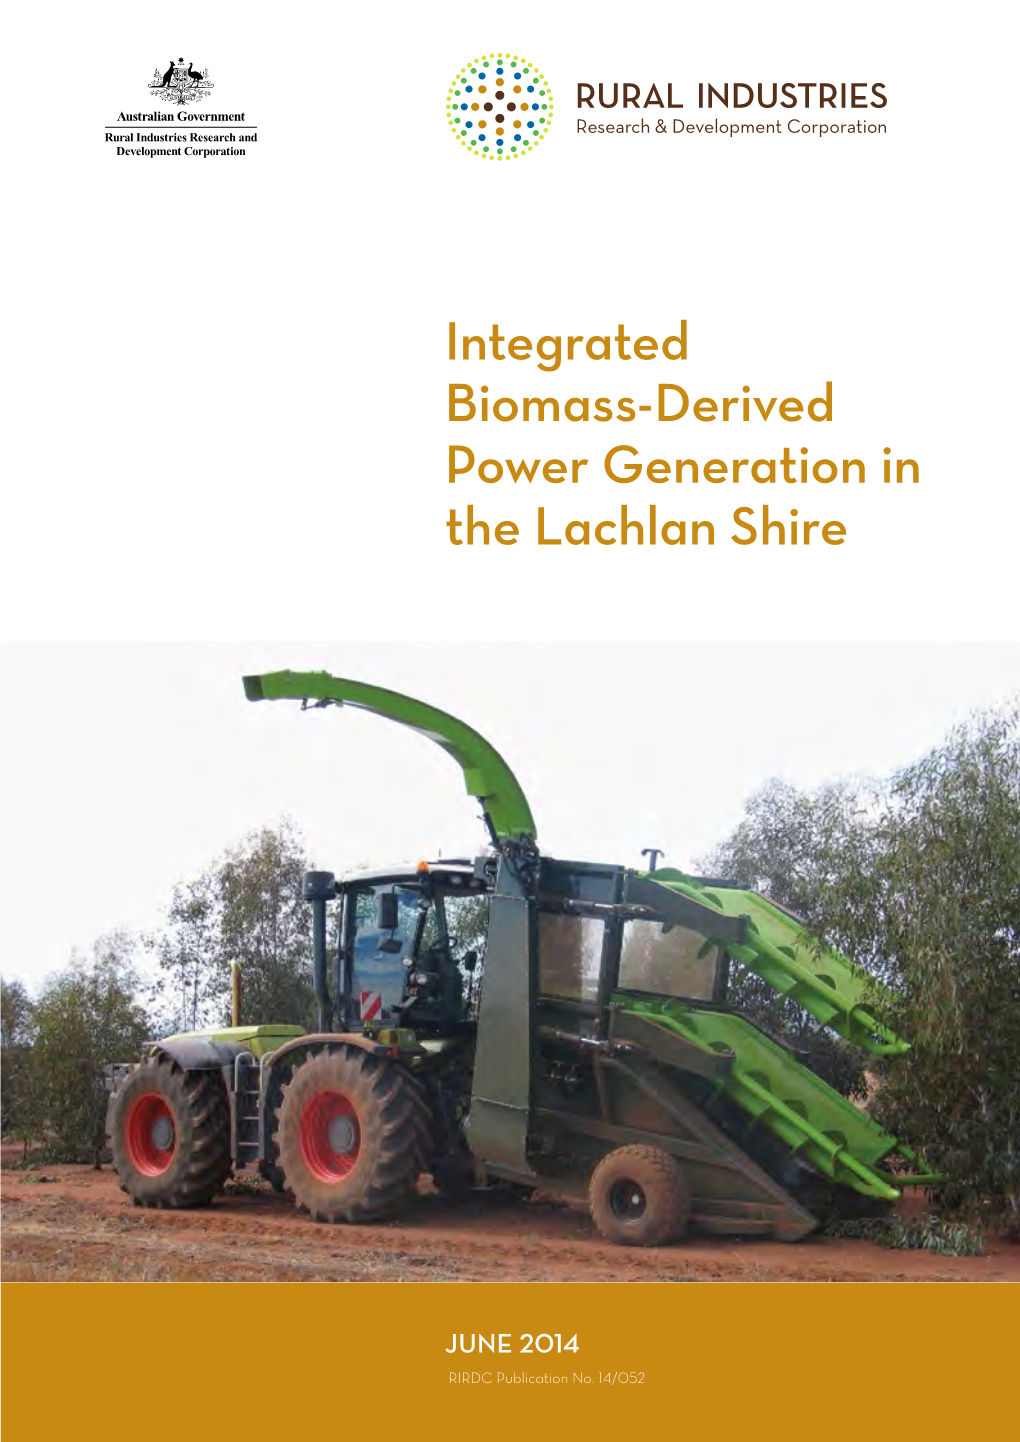 Integrated Biomass-Derived Power Generation in the Lachlan Shire